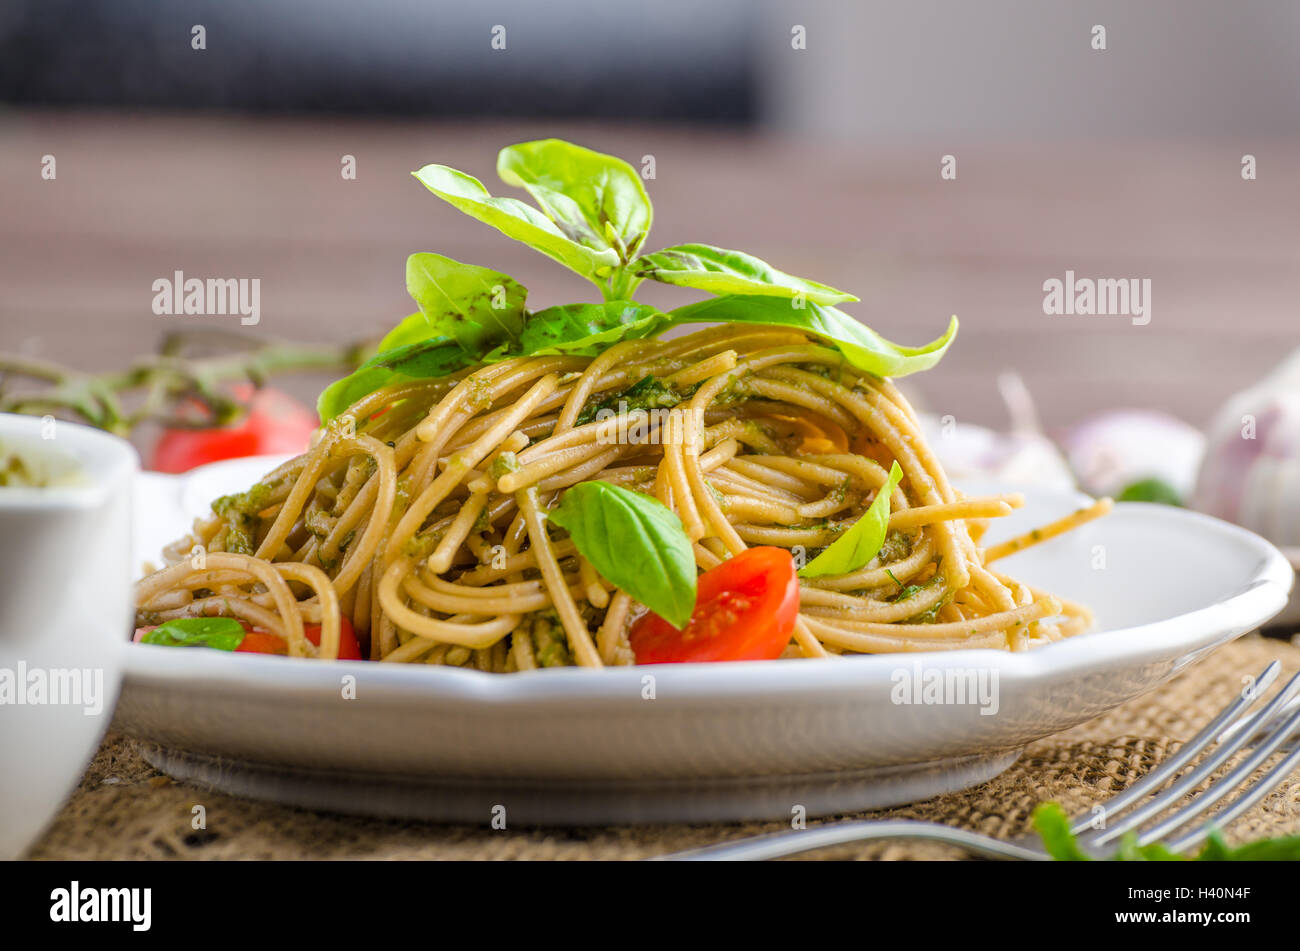 Pasta with Milan pesto - basil with nuts and permesan, garlic and olive oil, delicious and genial food. Stock Photo